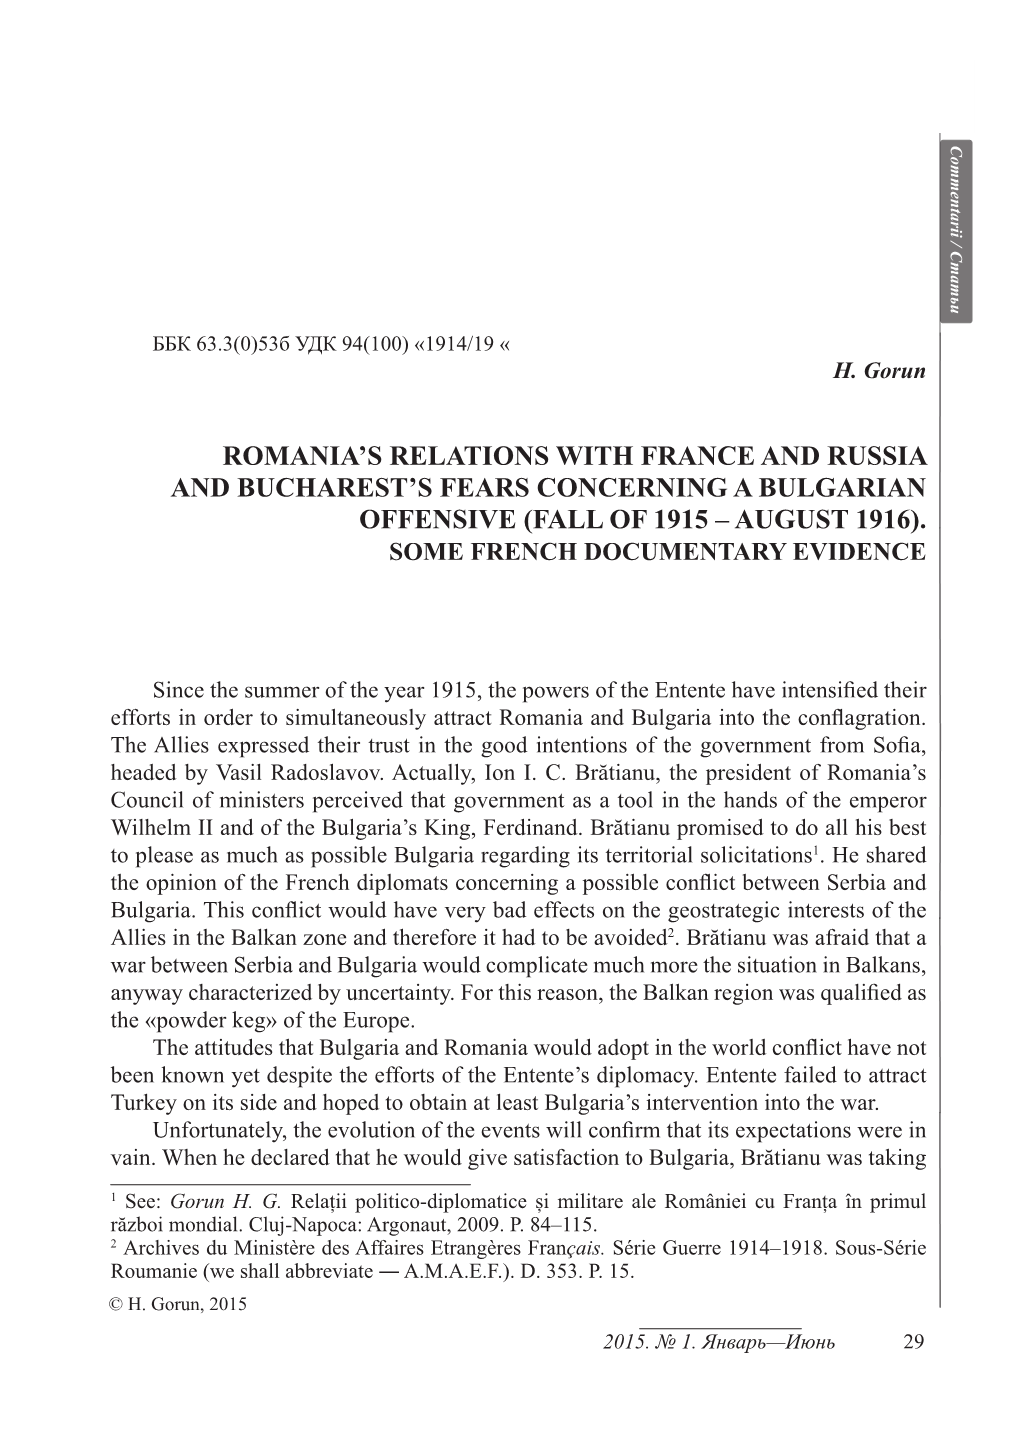 Romania's Relations with France and Russia And